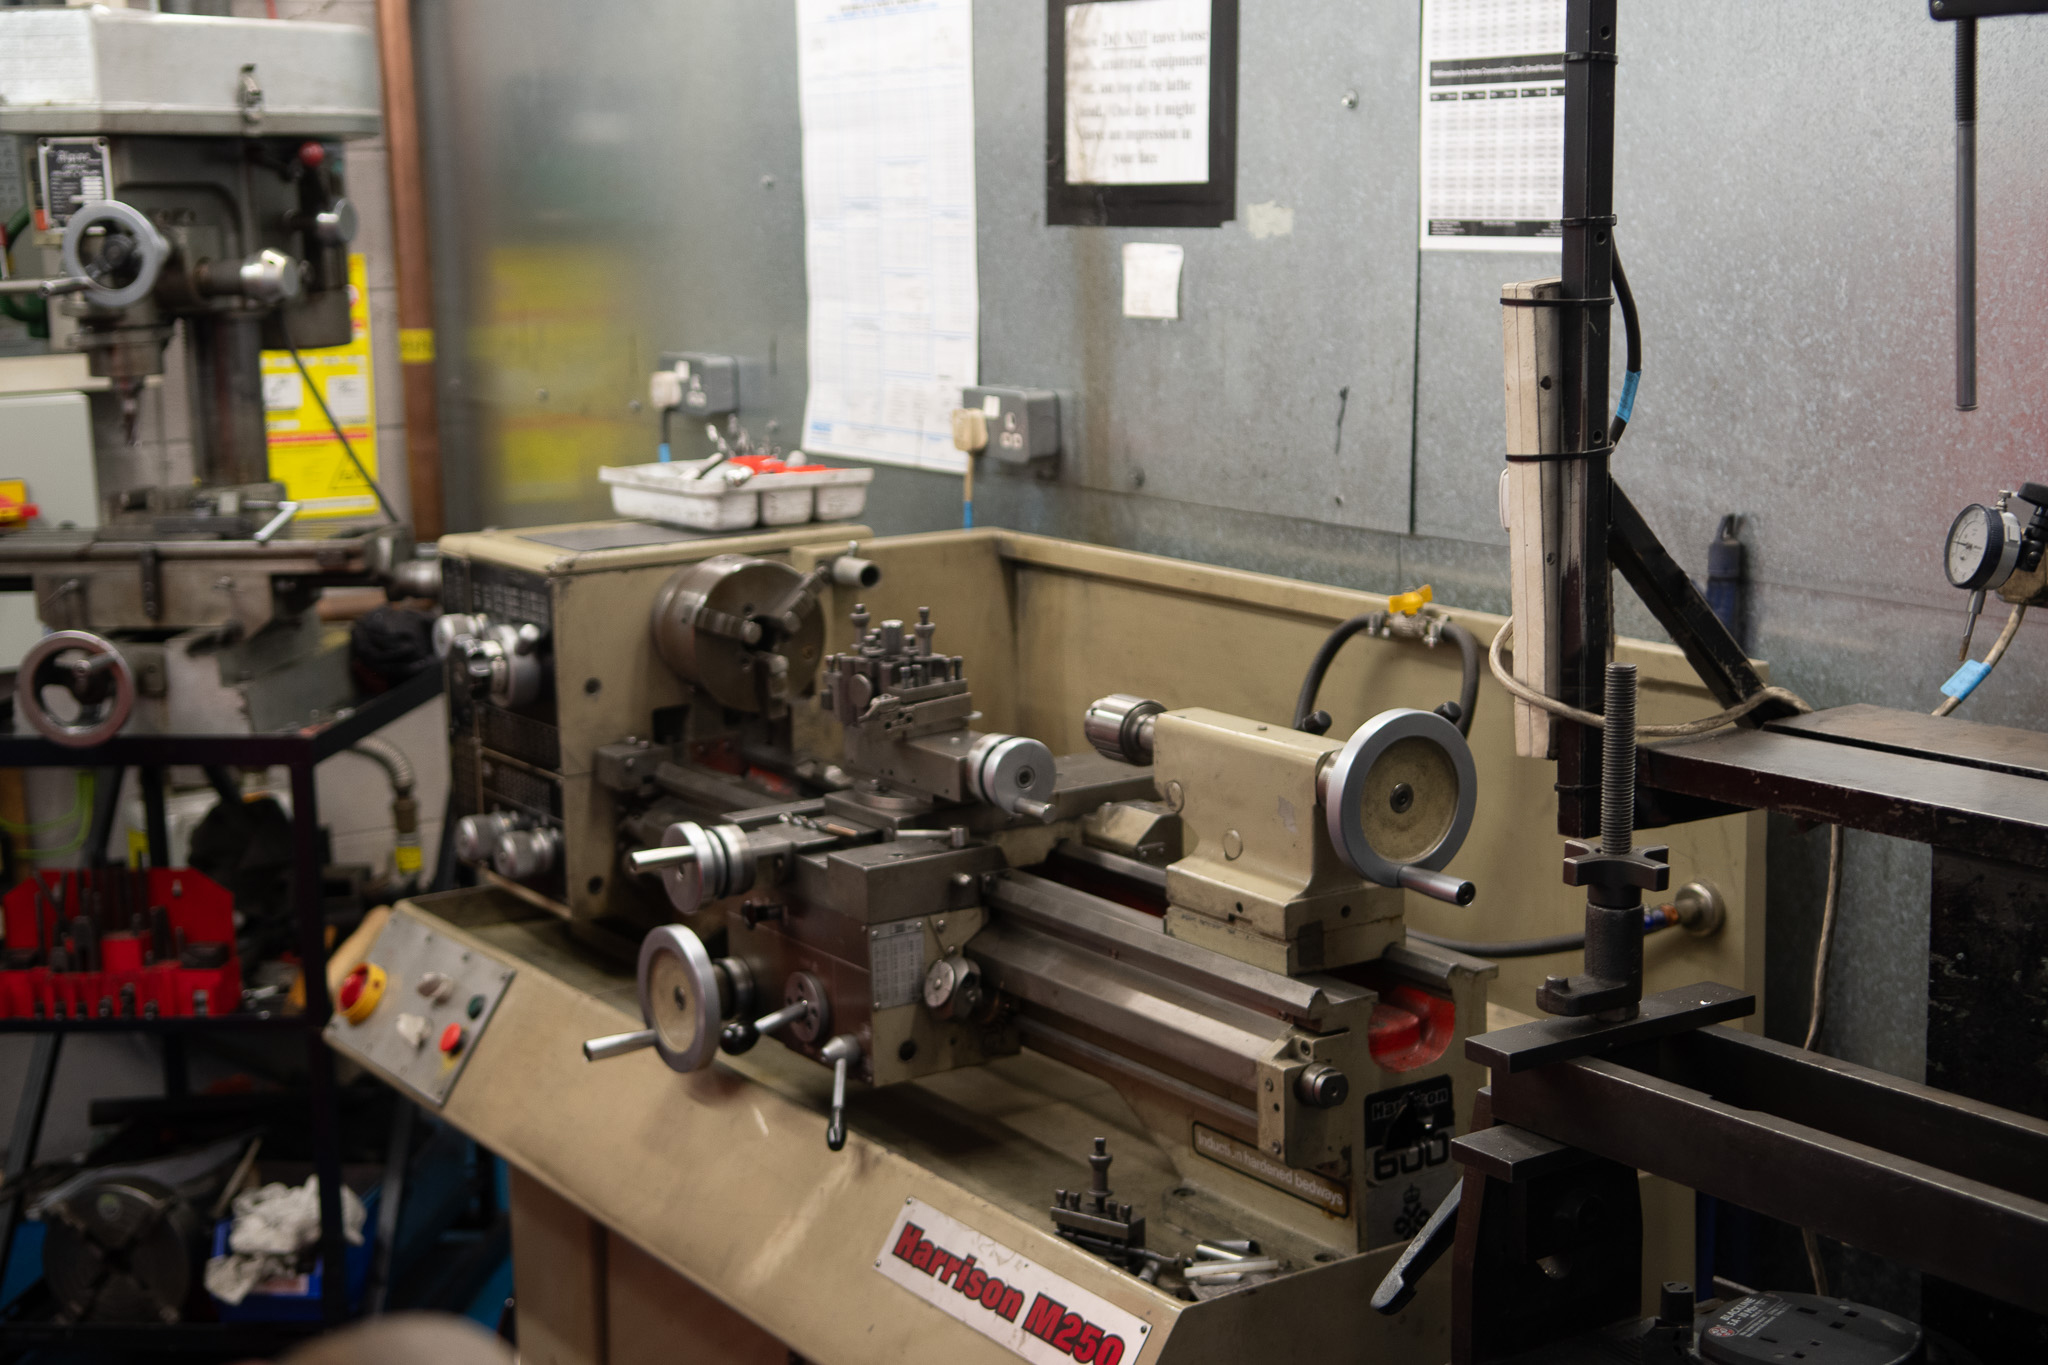 A metal lathe setup in a workshop, surrounded by various tools and equipment. The lathe is equipped with handles, controls, and a chuck holding a cylindrical piece for machining. The workshop walls are covered with metal sheets and some papers and tools hanging.